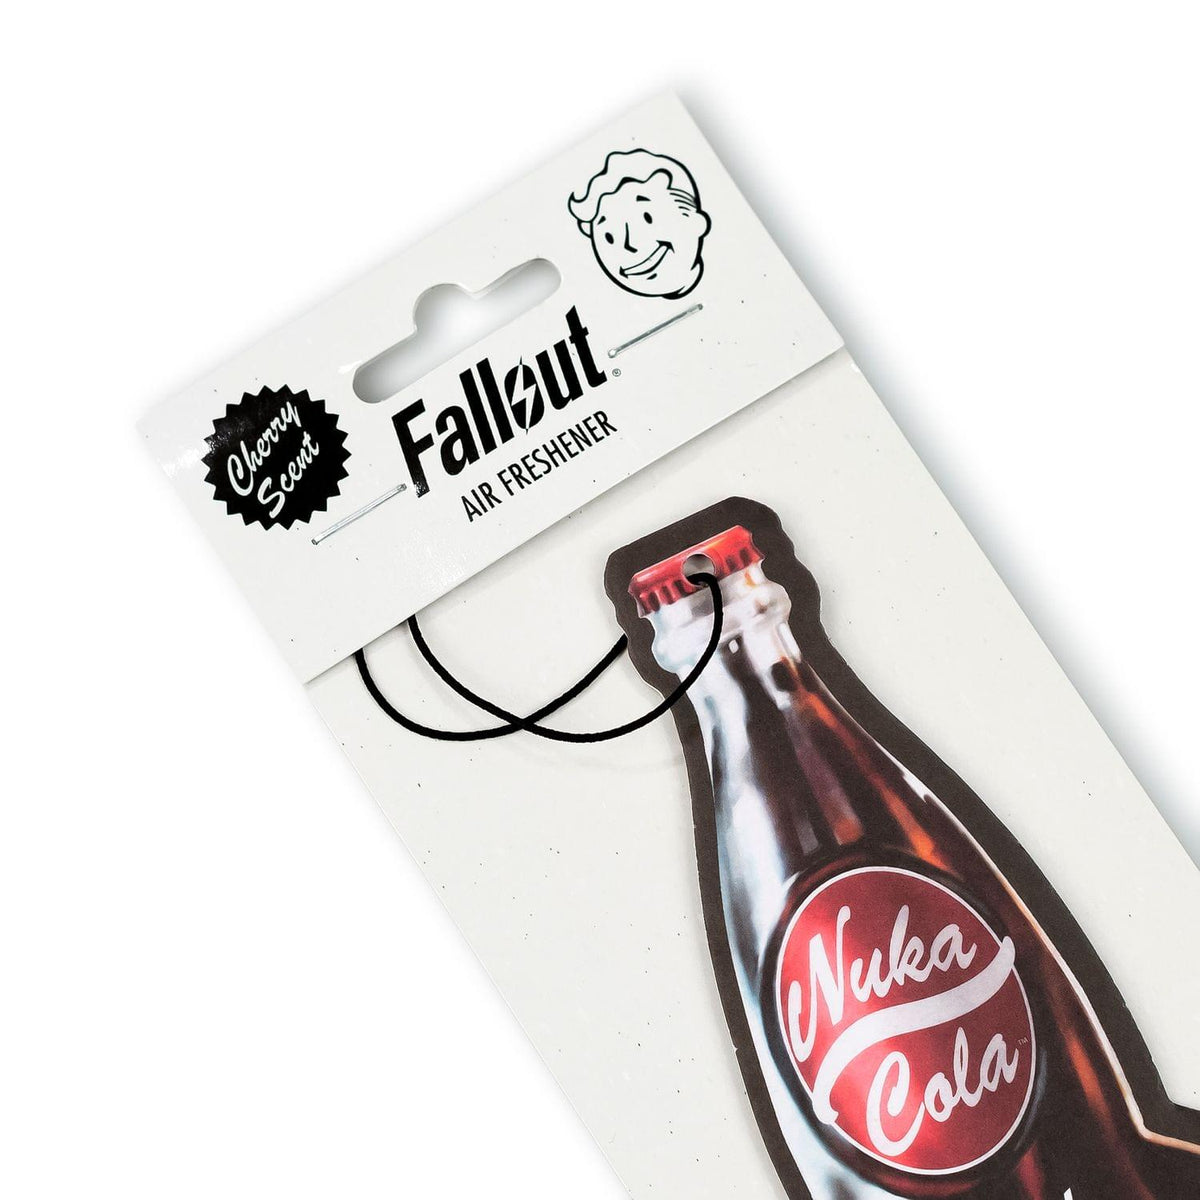 Just Funky Fallout Collectibles, Nuka Cola Keychain Bottle Opener, Xbox  Game Fallout